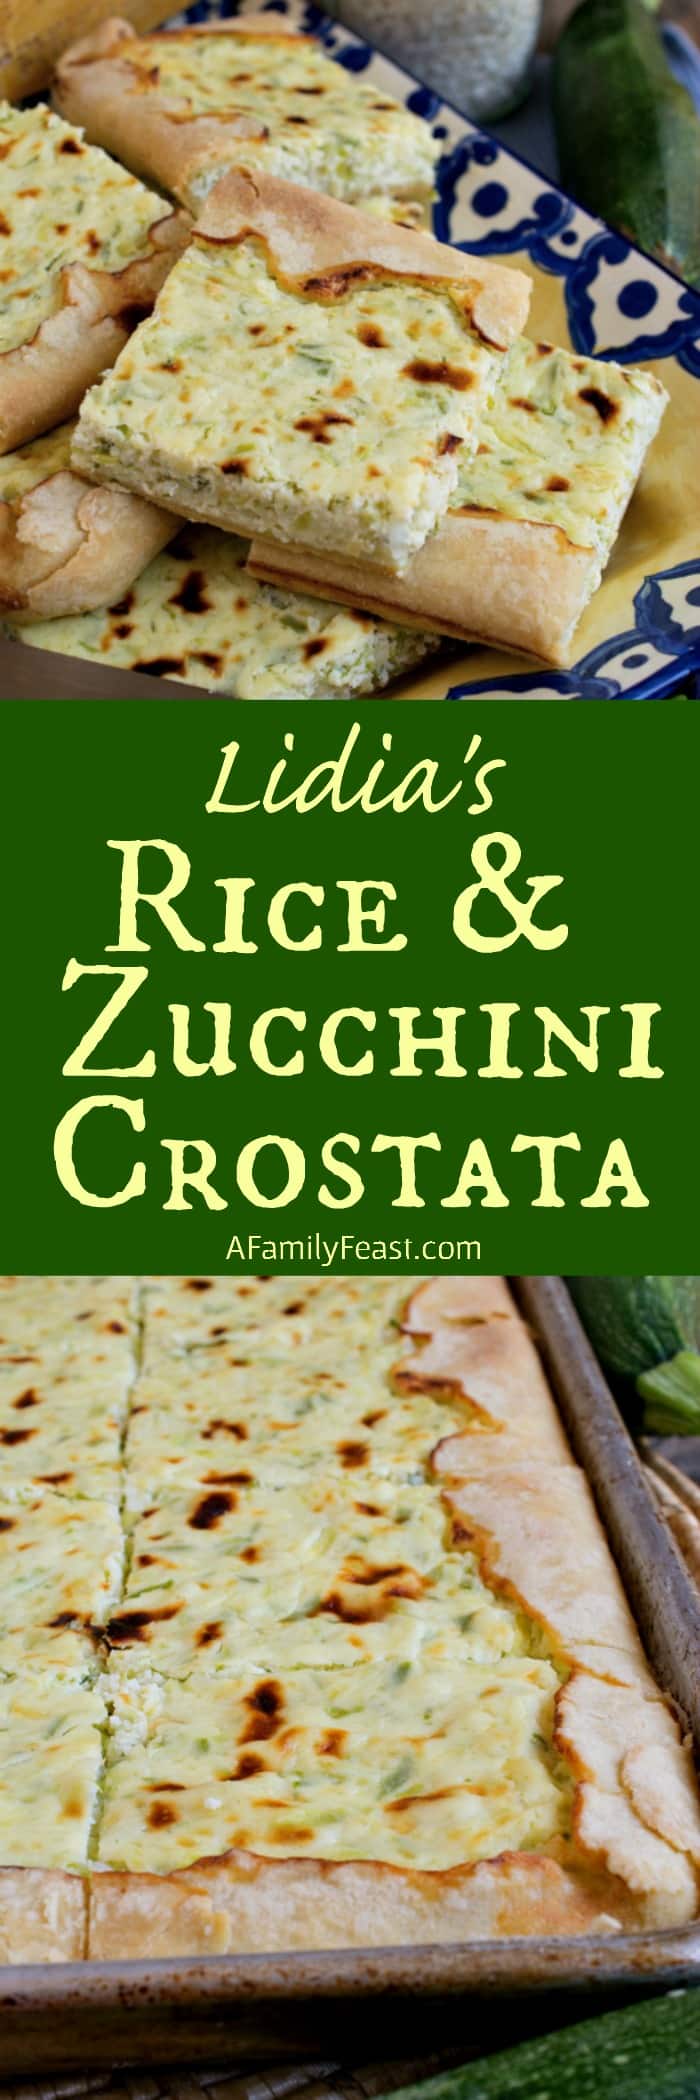 Rice and Zucchini Crostata - This recipe from Lidia Bastianich is a fantastic way to cook with fresh garden zucchini!